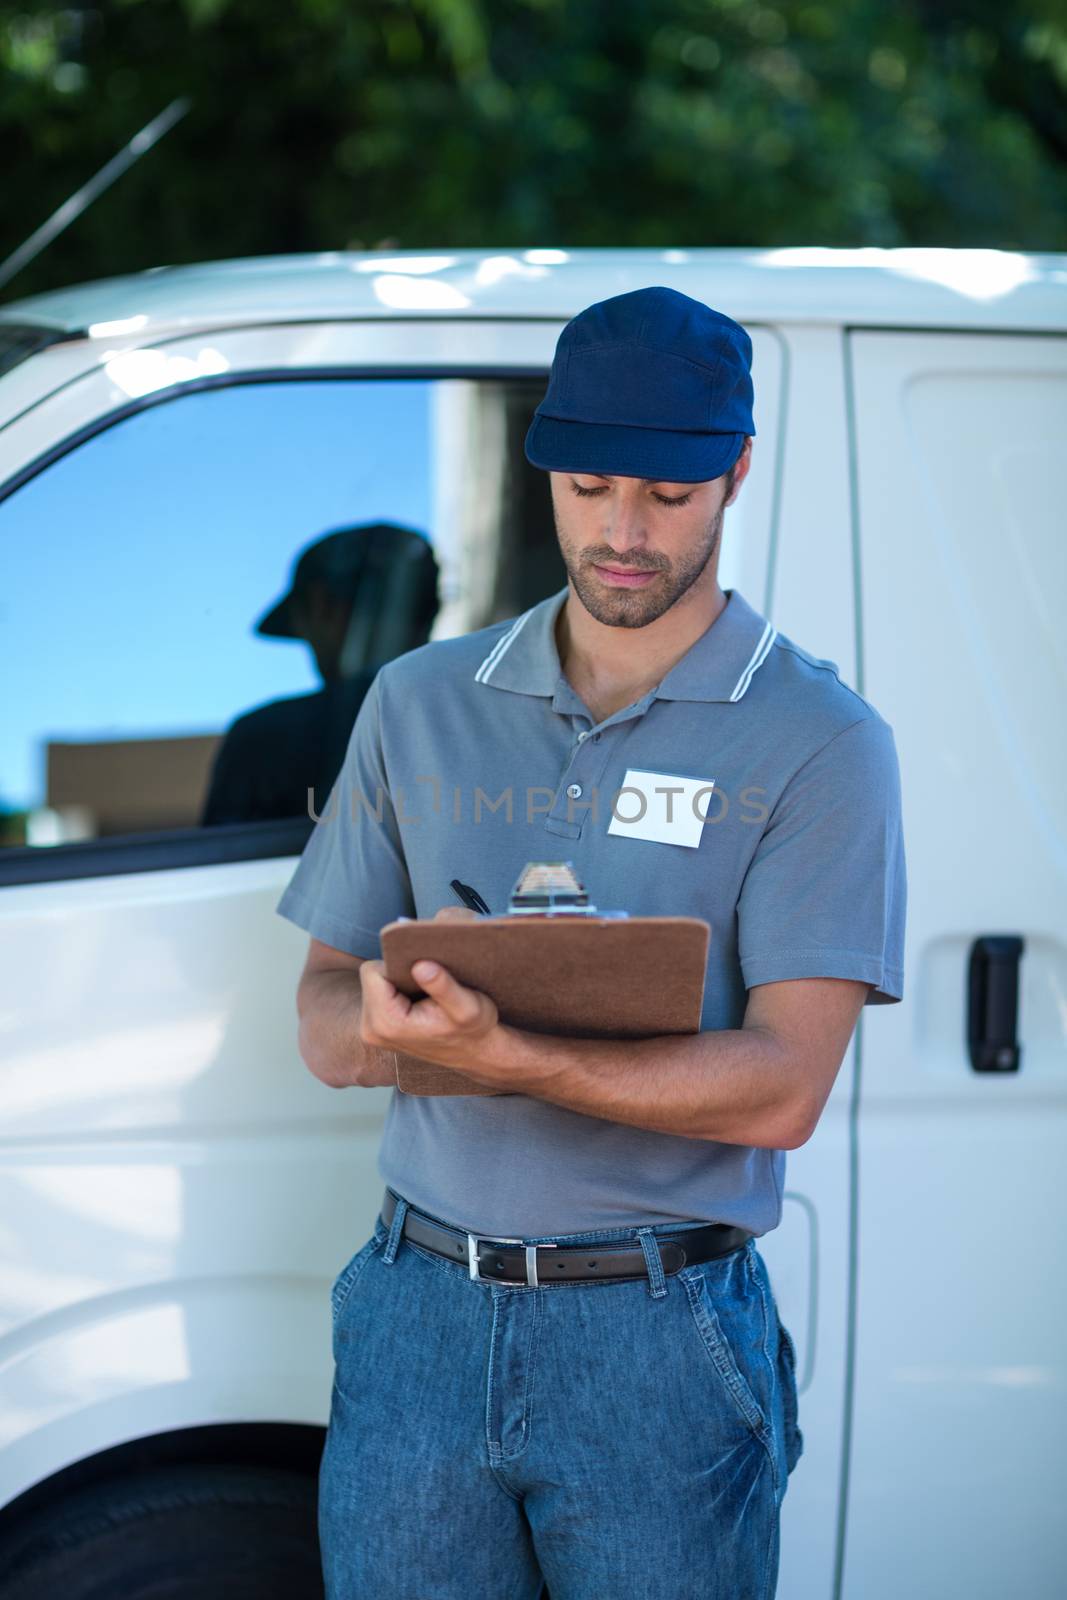 Delivery person writing in clipboard while standing by van